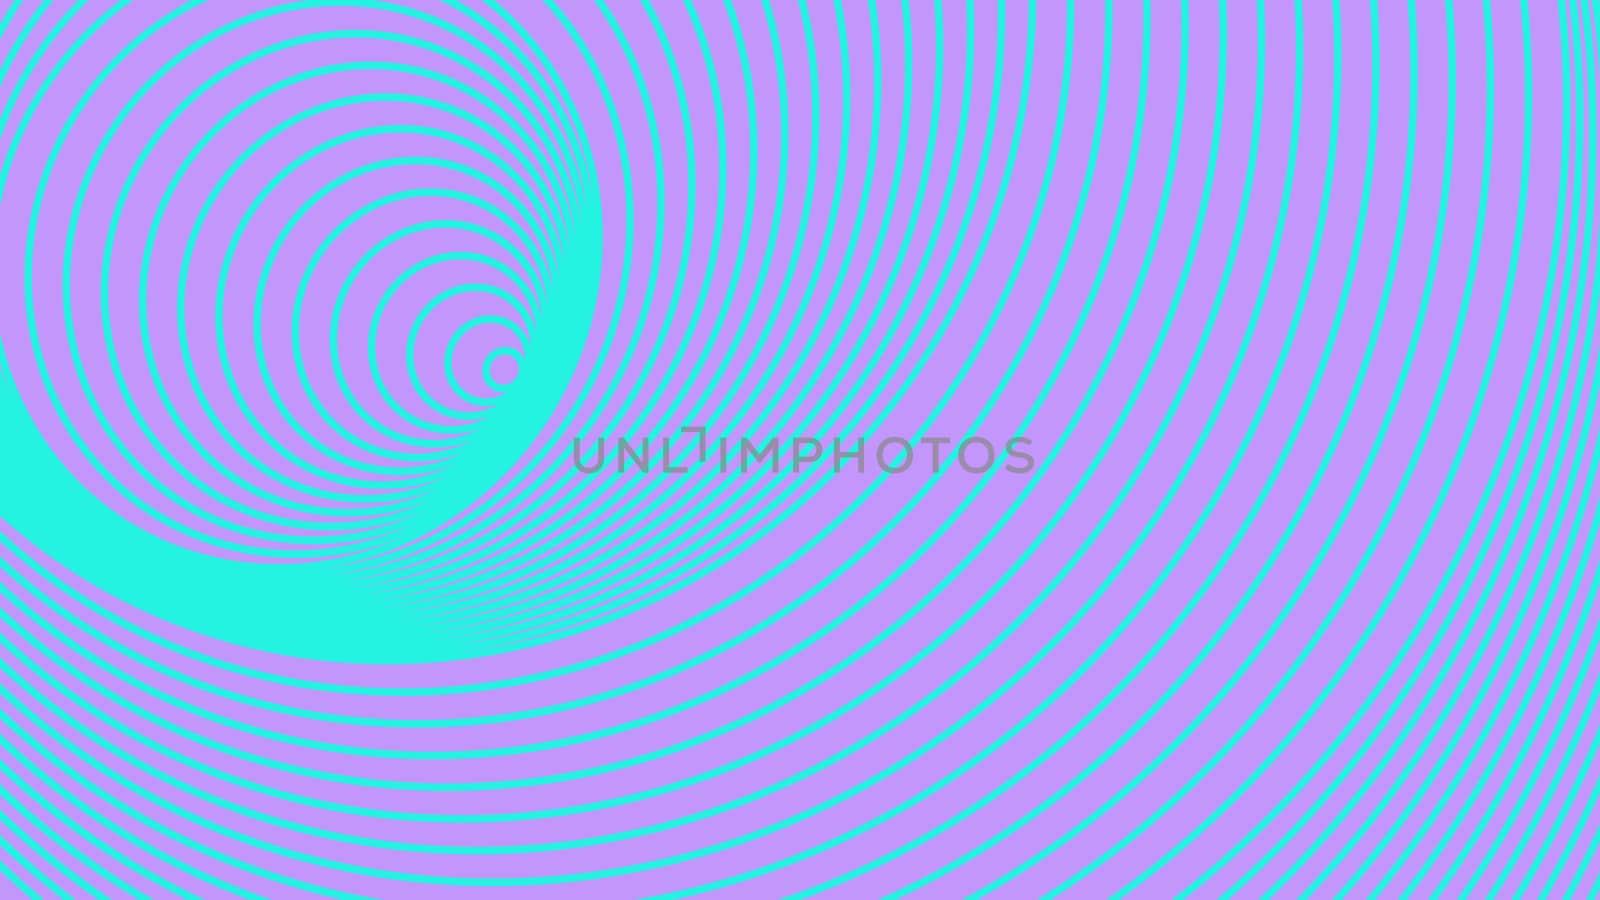 Duplicated Circles Background and Wallpaper. Frequent Repeating  by sanches812